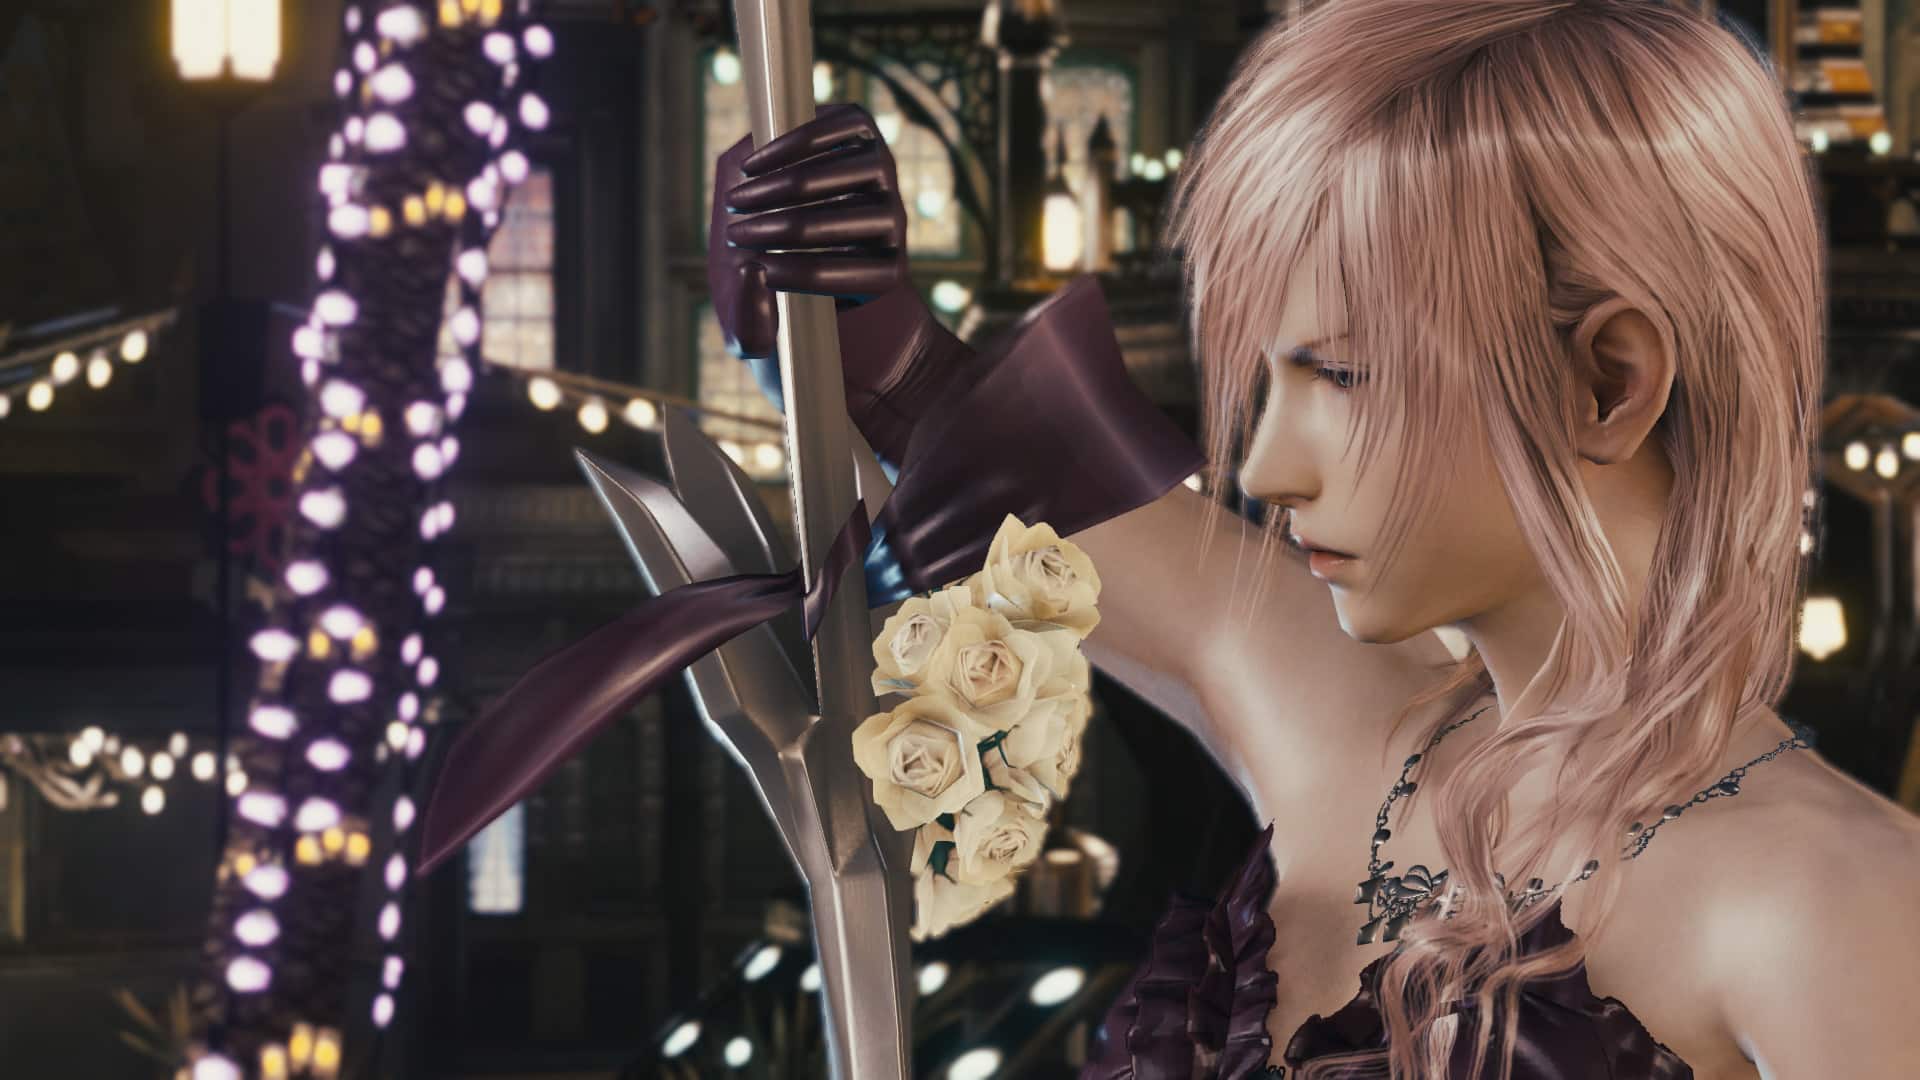 Lighting Returns: Final Fantasy XIII Steam Version Patched for Some Reason